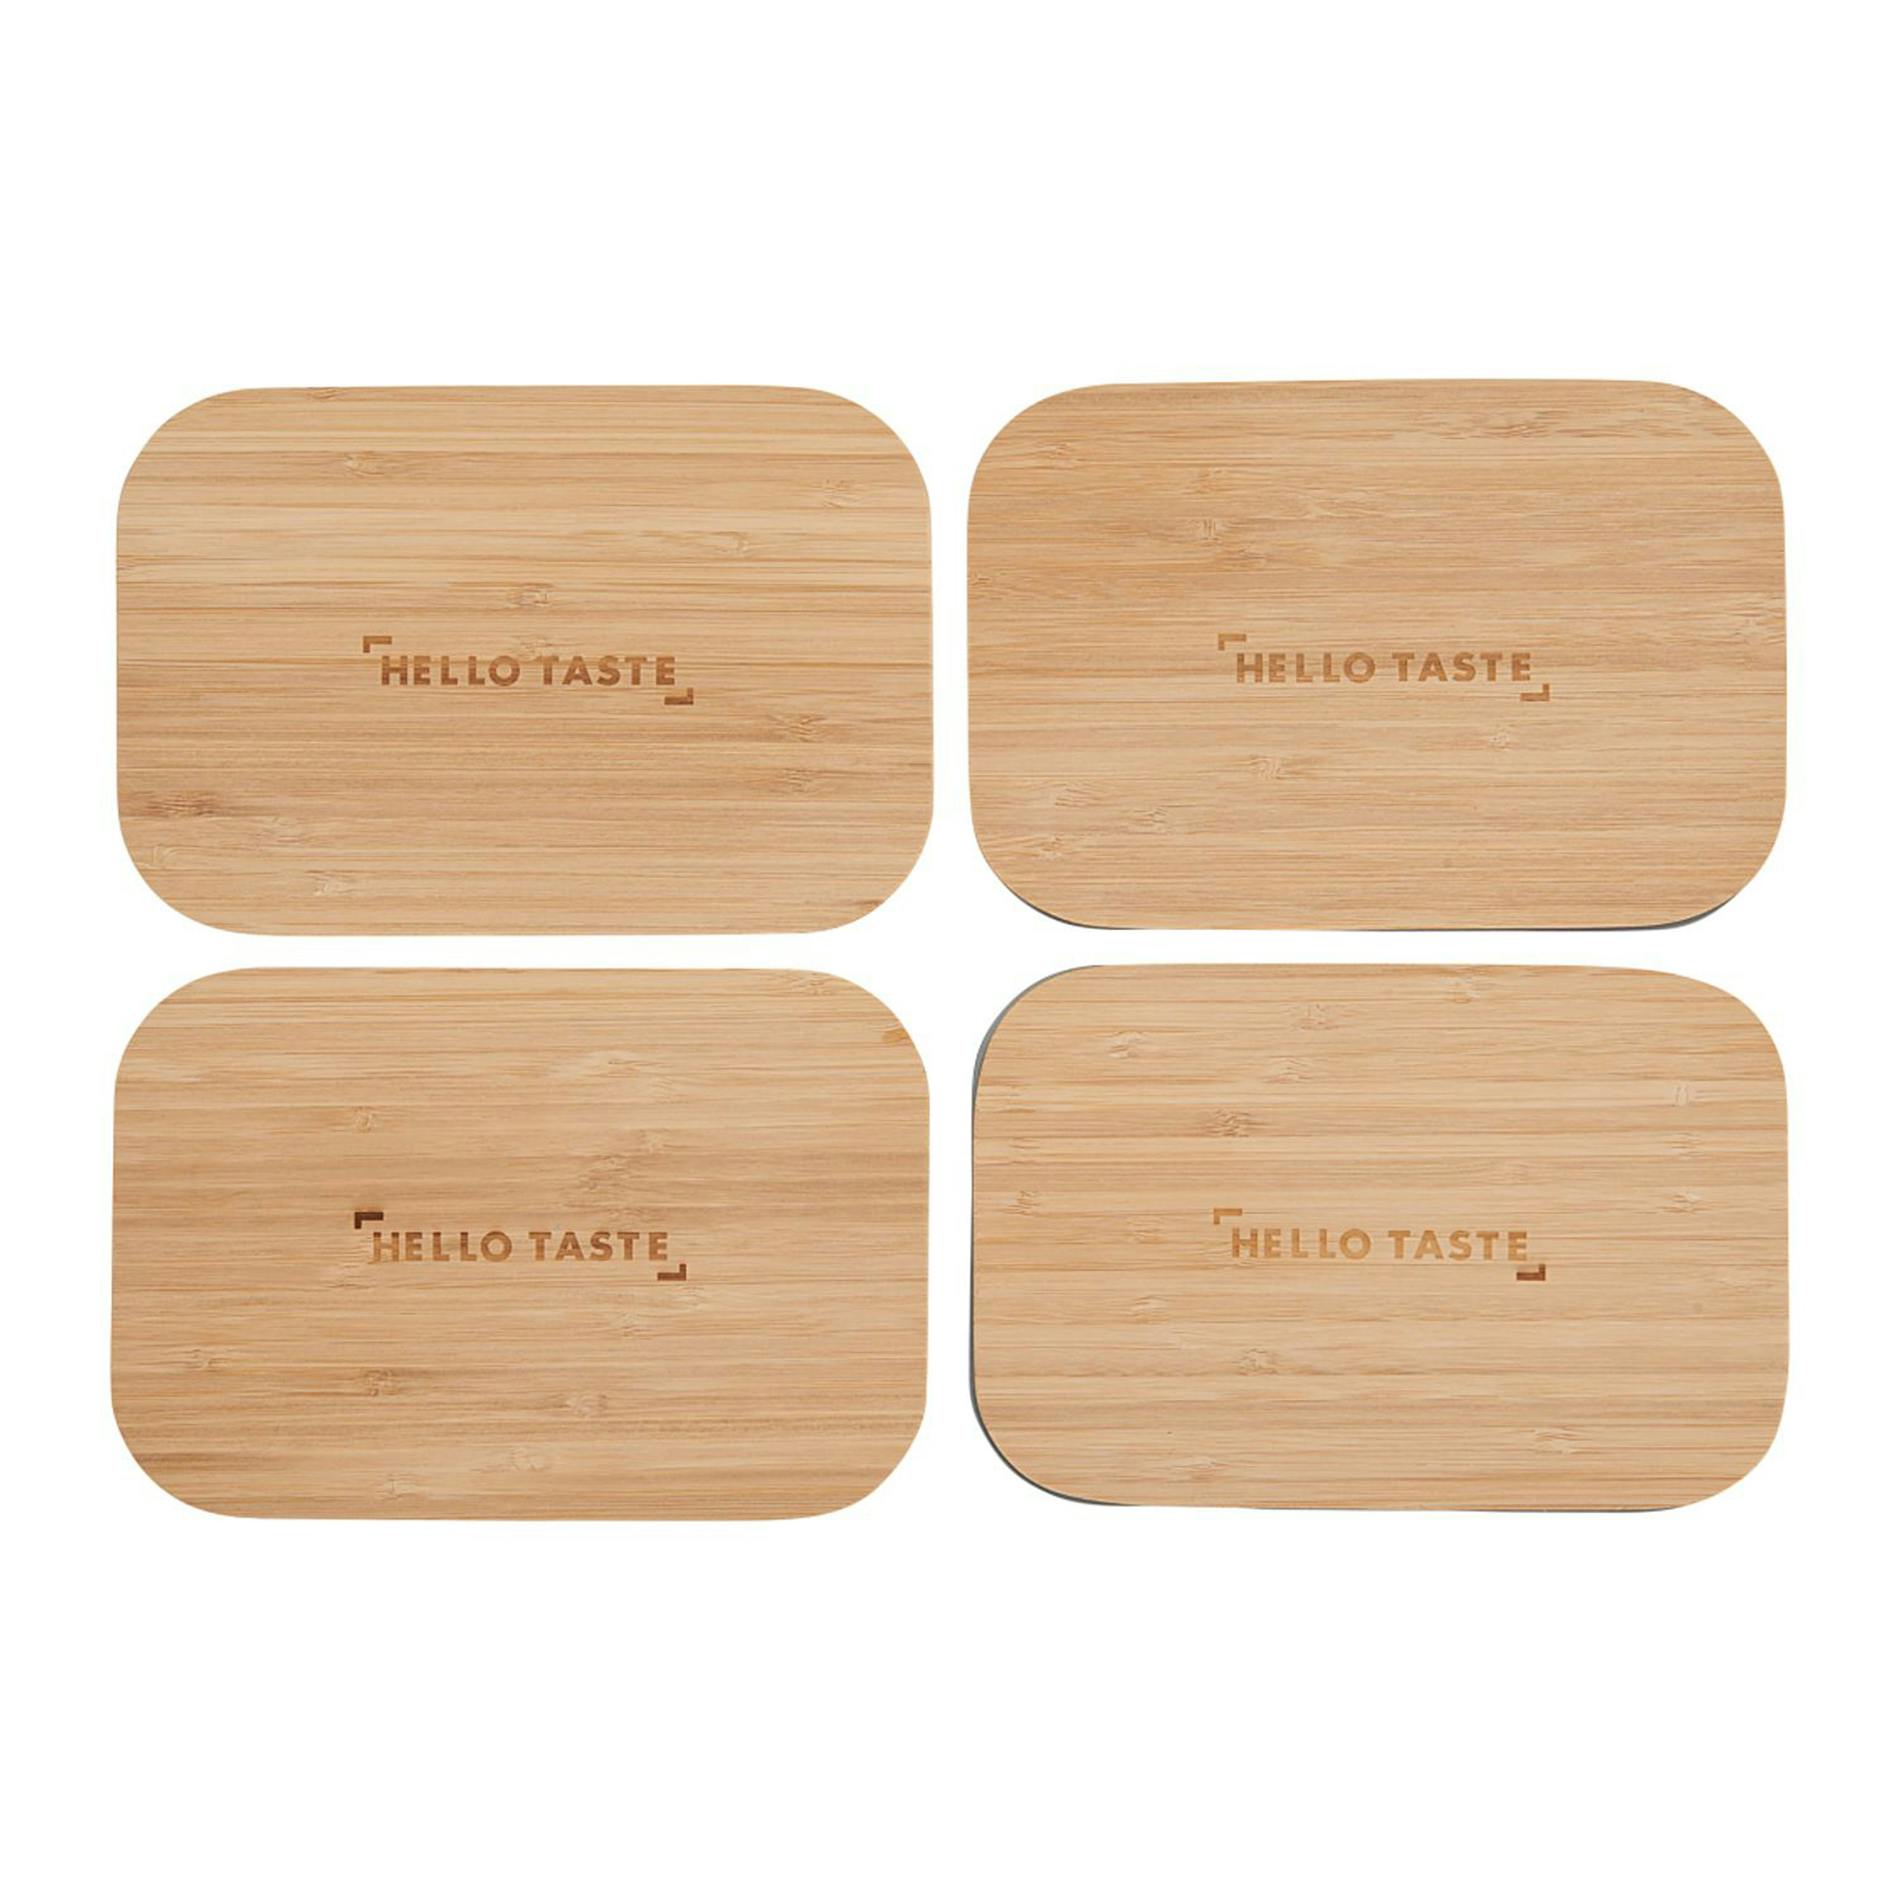 Bamboo Fiber Lunch Box with Cutting Board Lid - additional Image 3